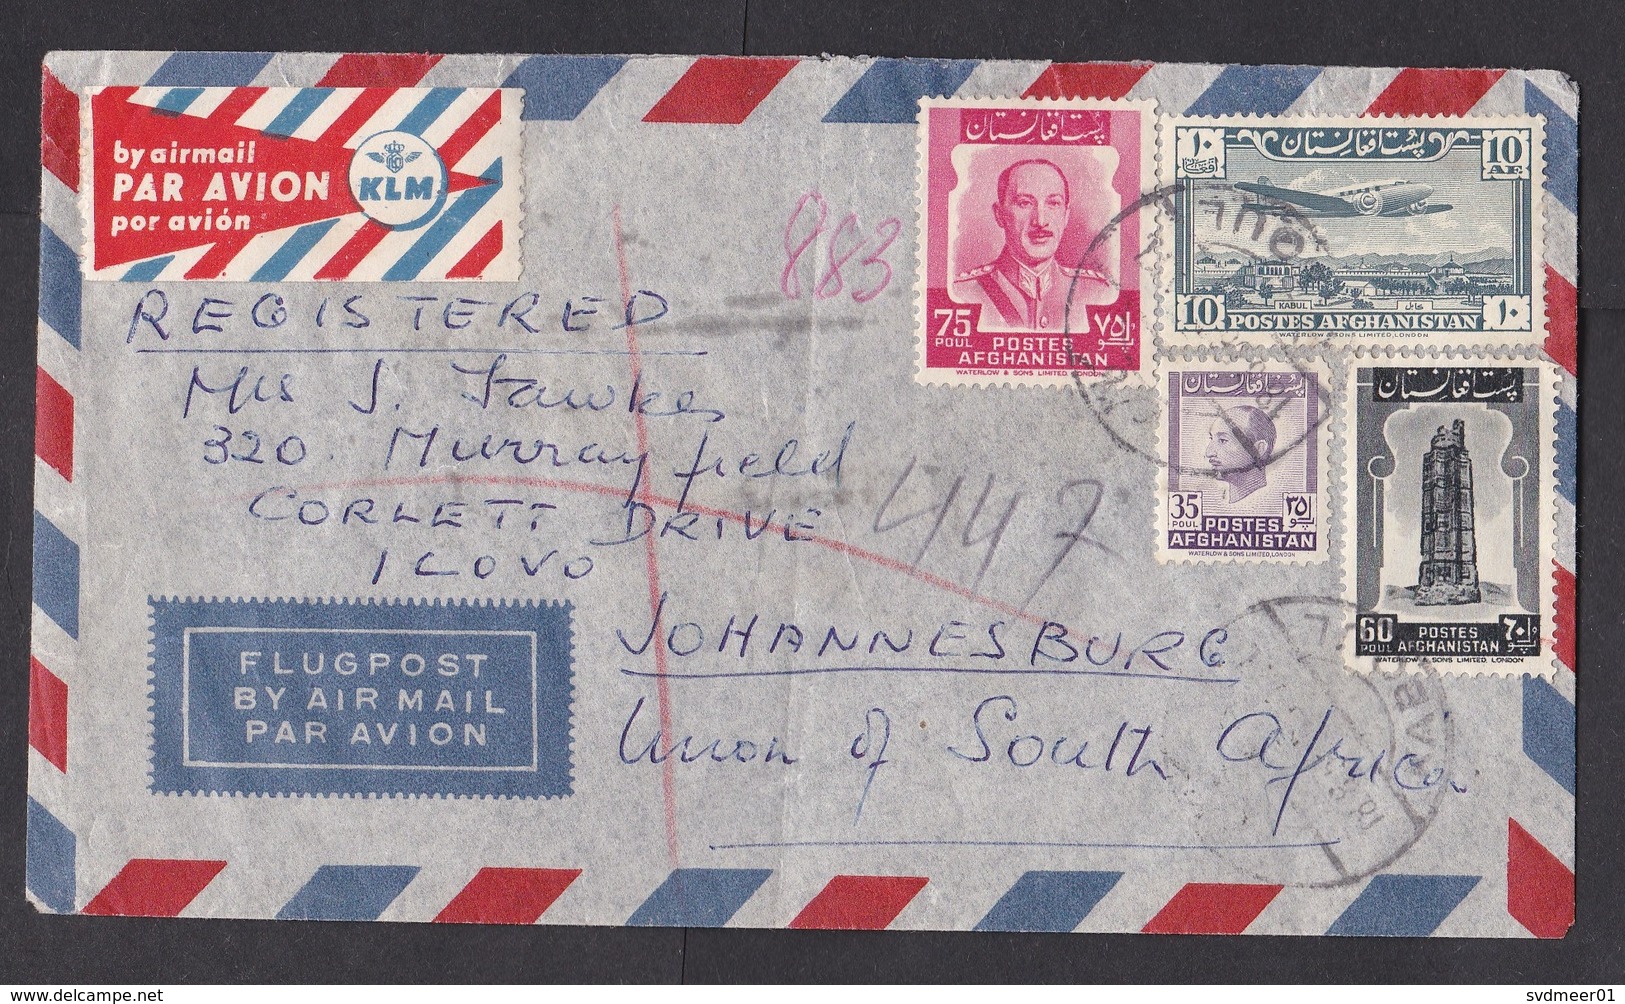 Afghanistan: Airmail Cover To South Africa, 1950s?, 4 Stamps, Rare KLM Air Label, UN Mission (minor Damage, See Scan) - Afghanistan